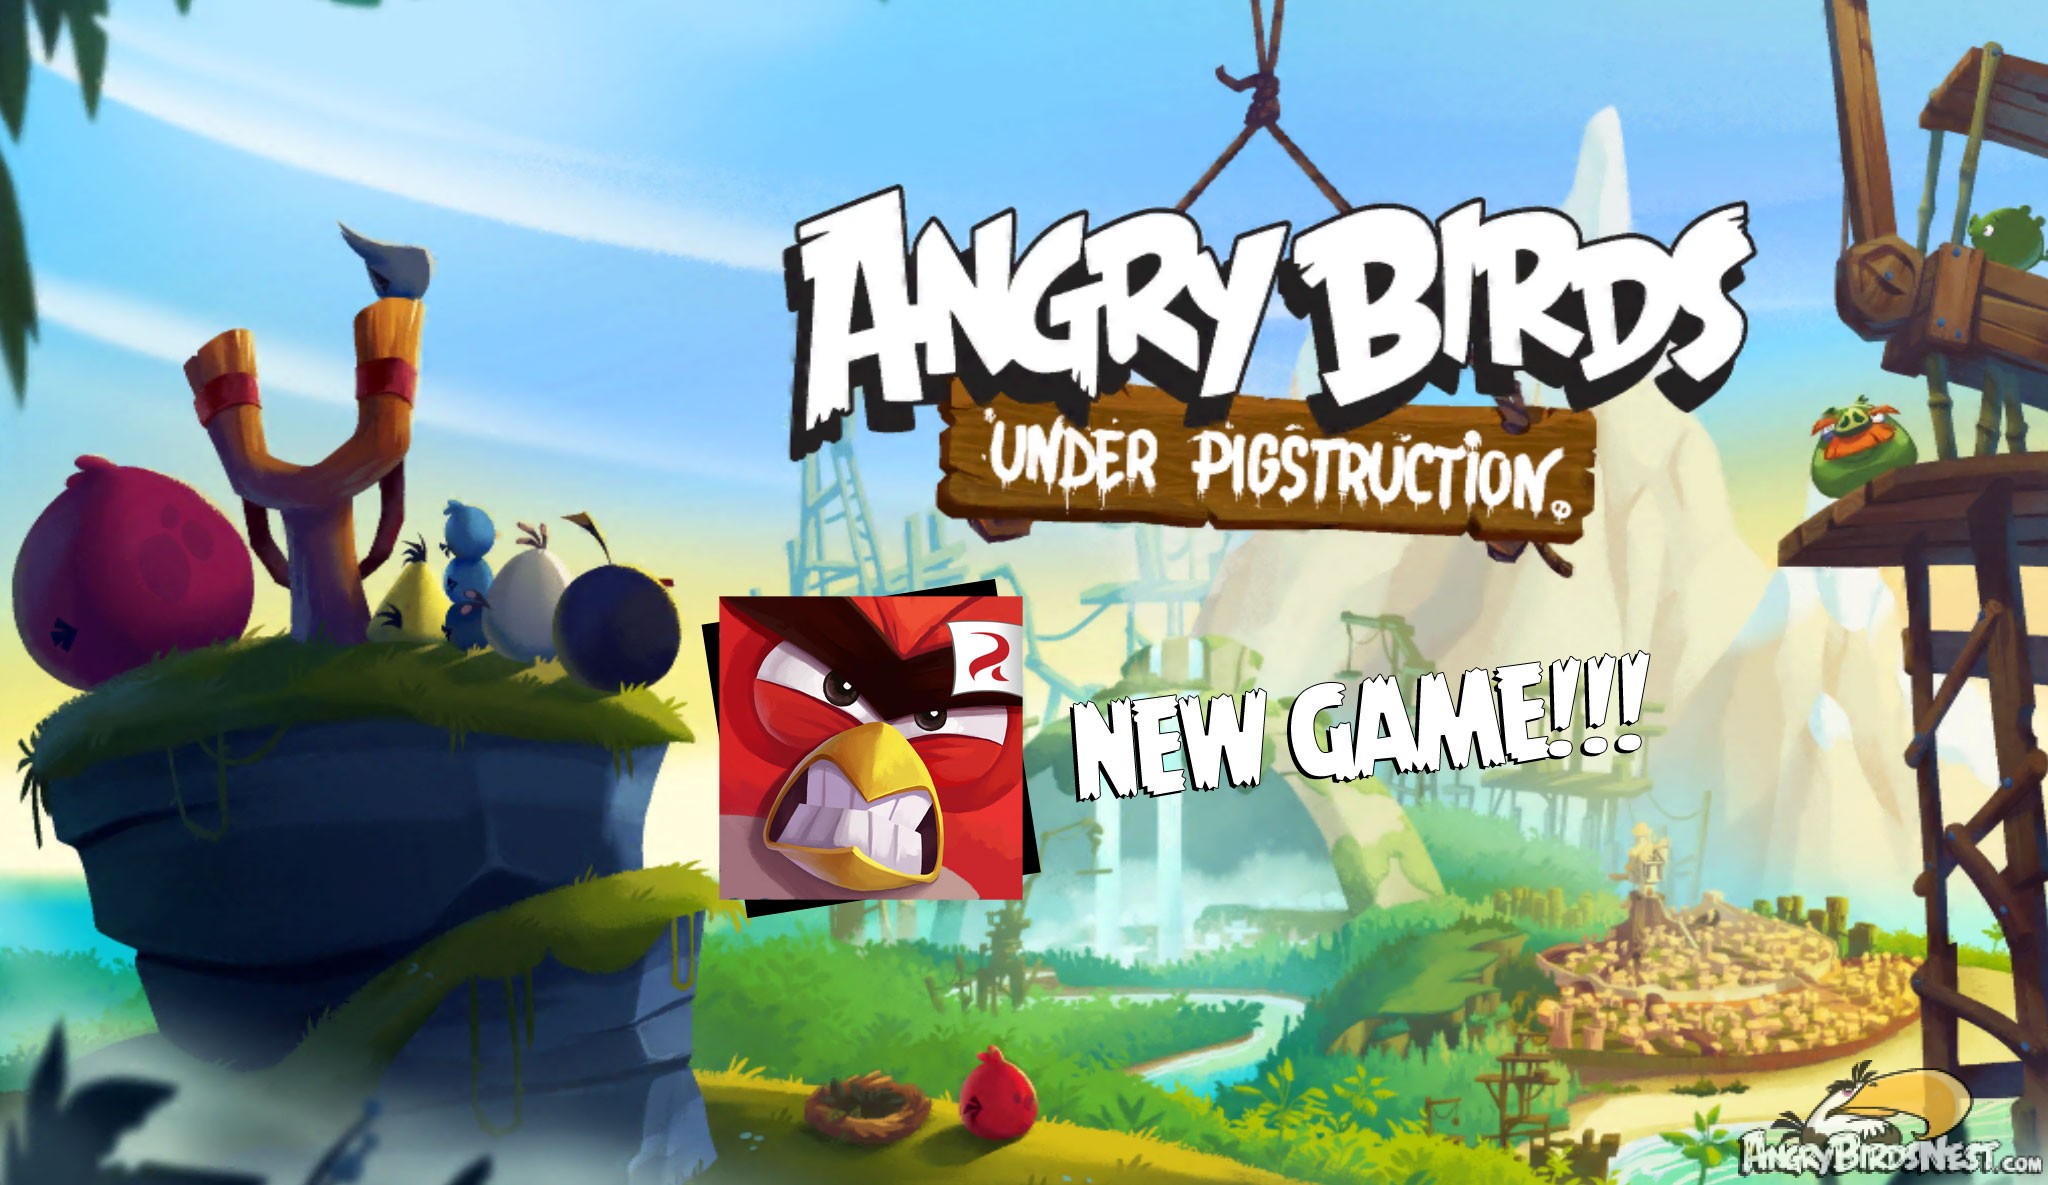 Angry Birds Under Pigstruction Featured Image v3